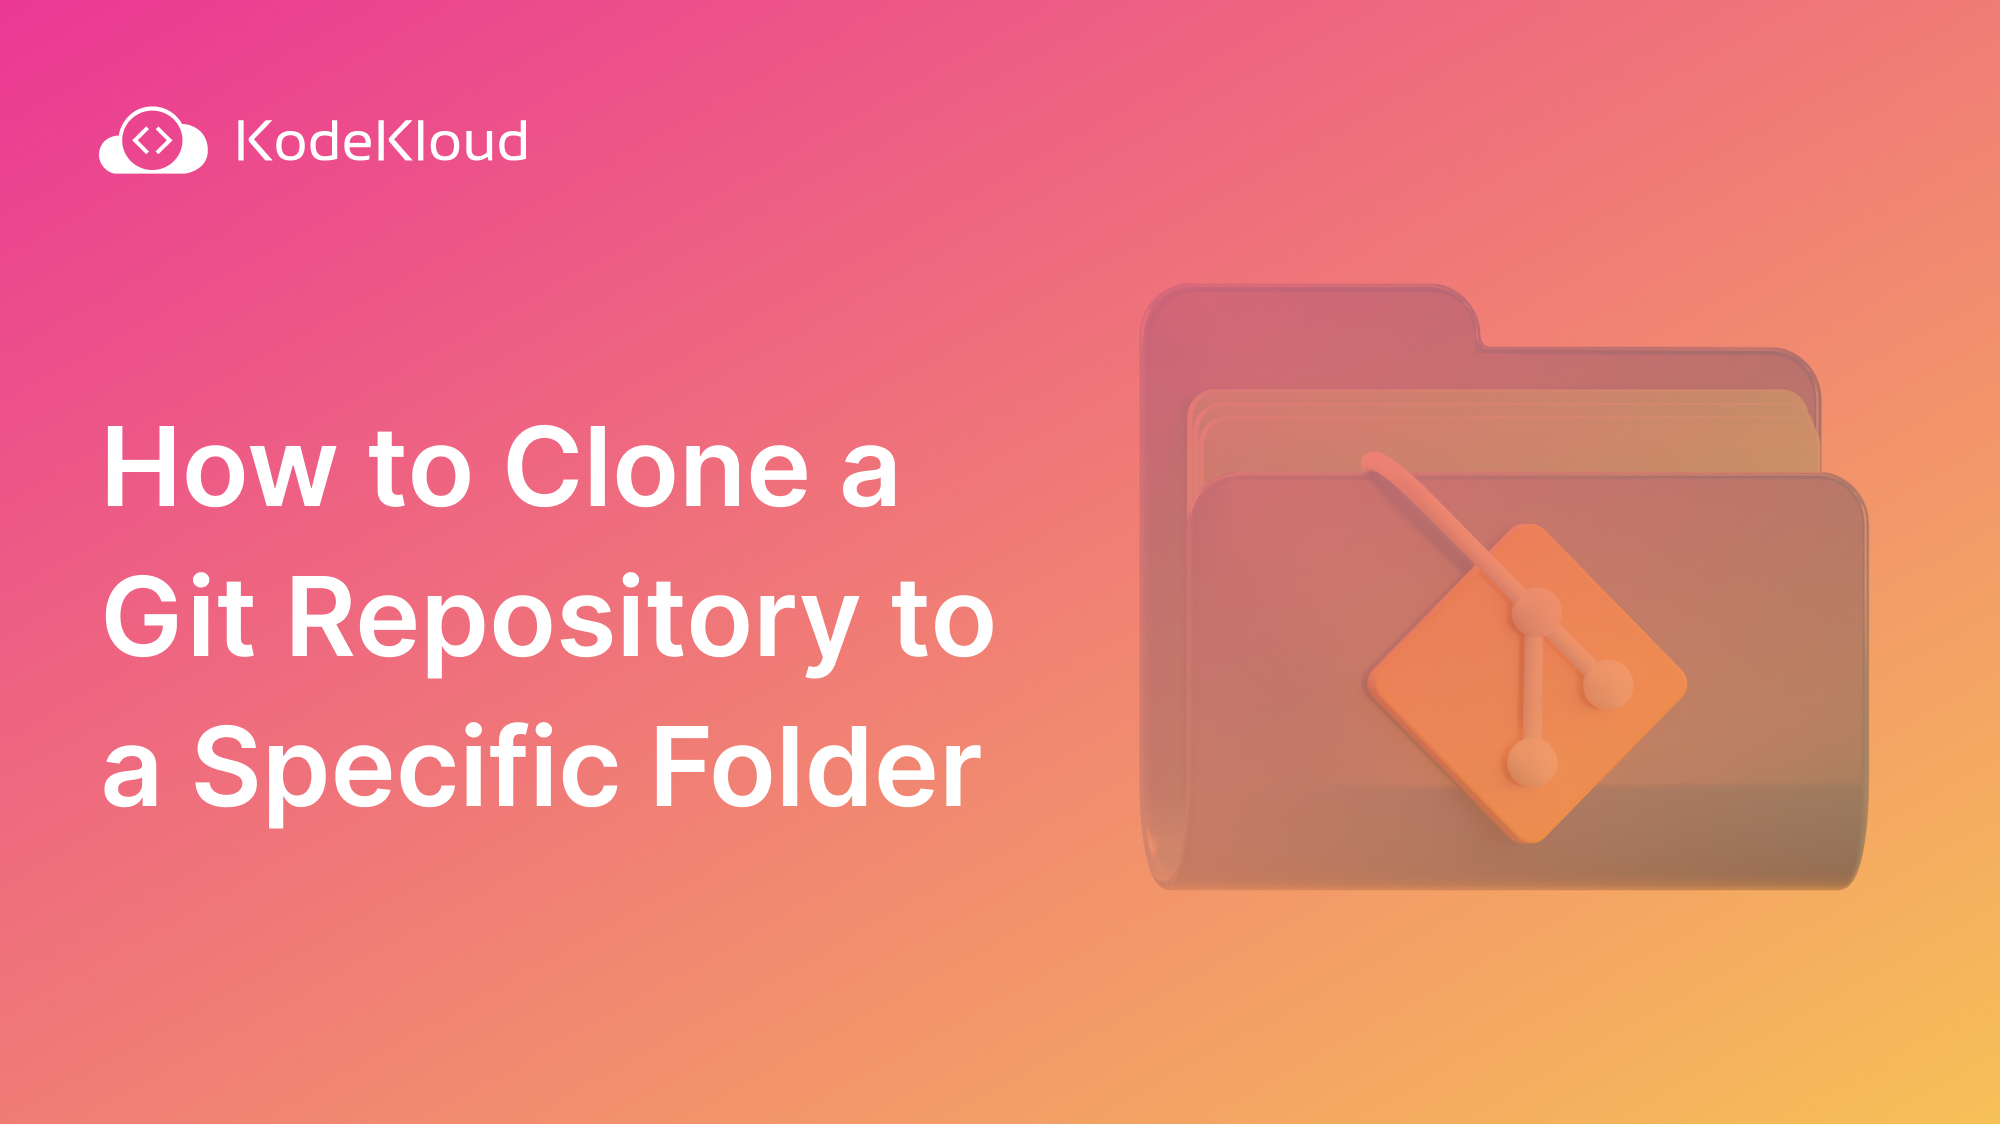 How to Clone a Git Repository to a Specific Folder